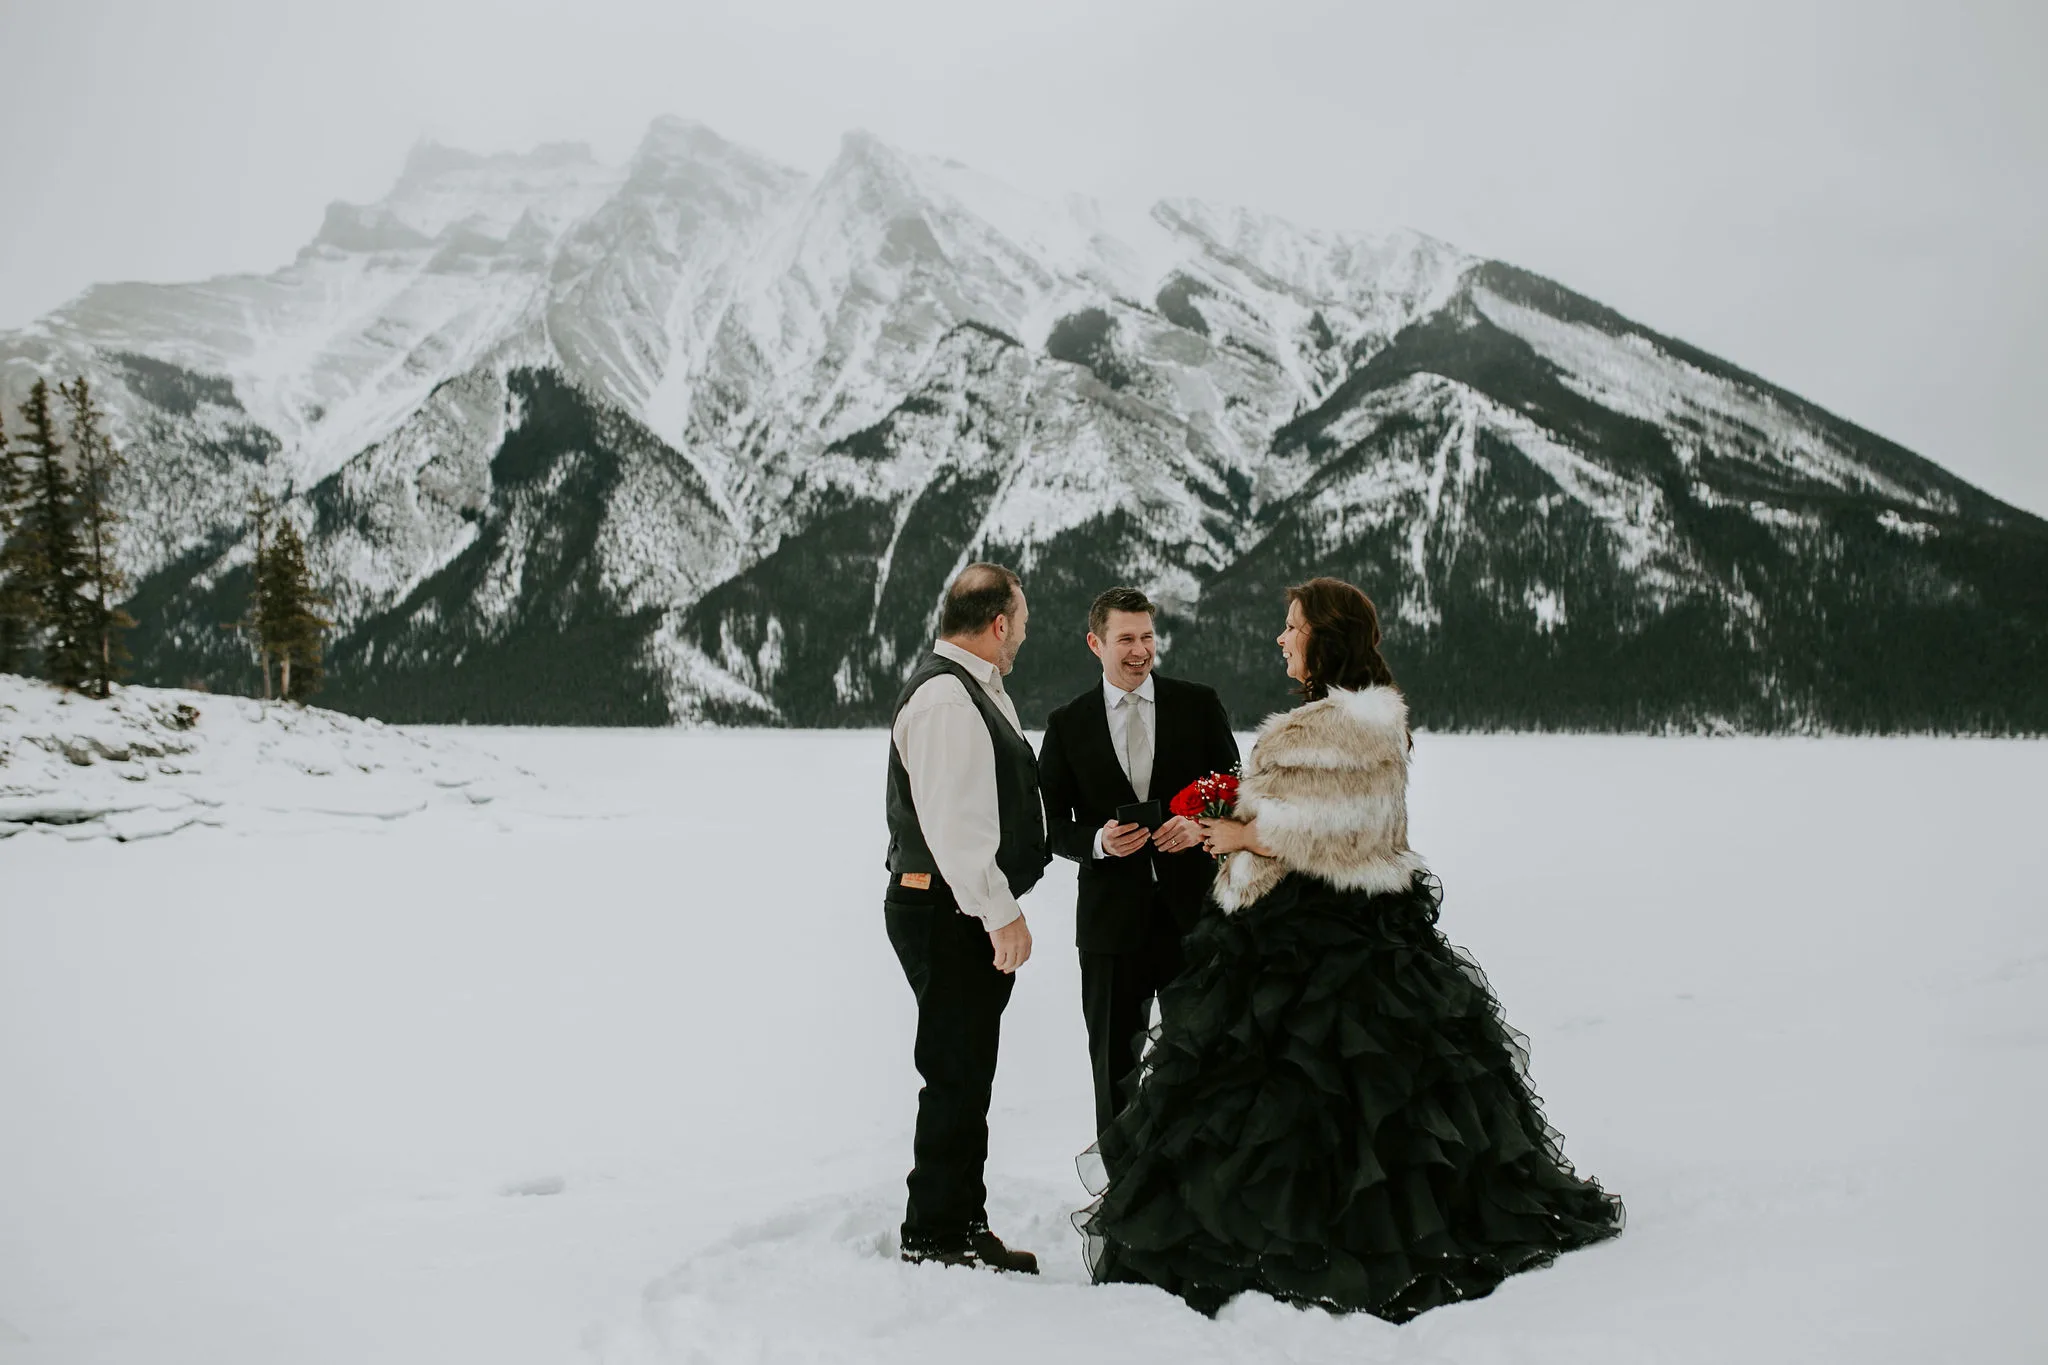 Officiant Rich marrying a couple during an elopement in the snow